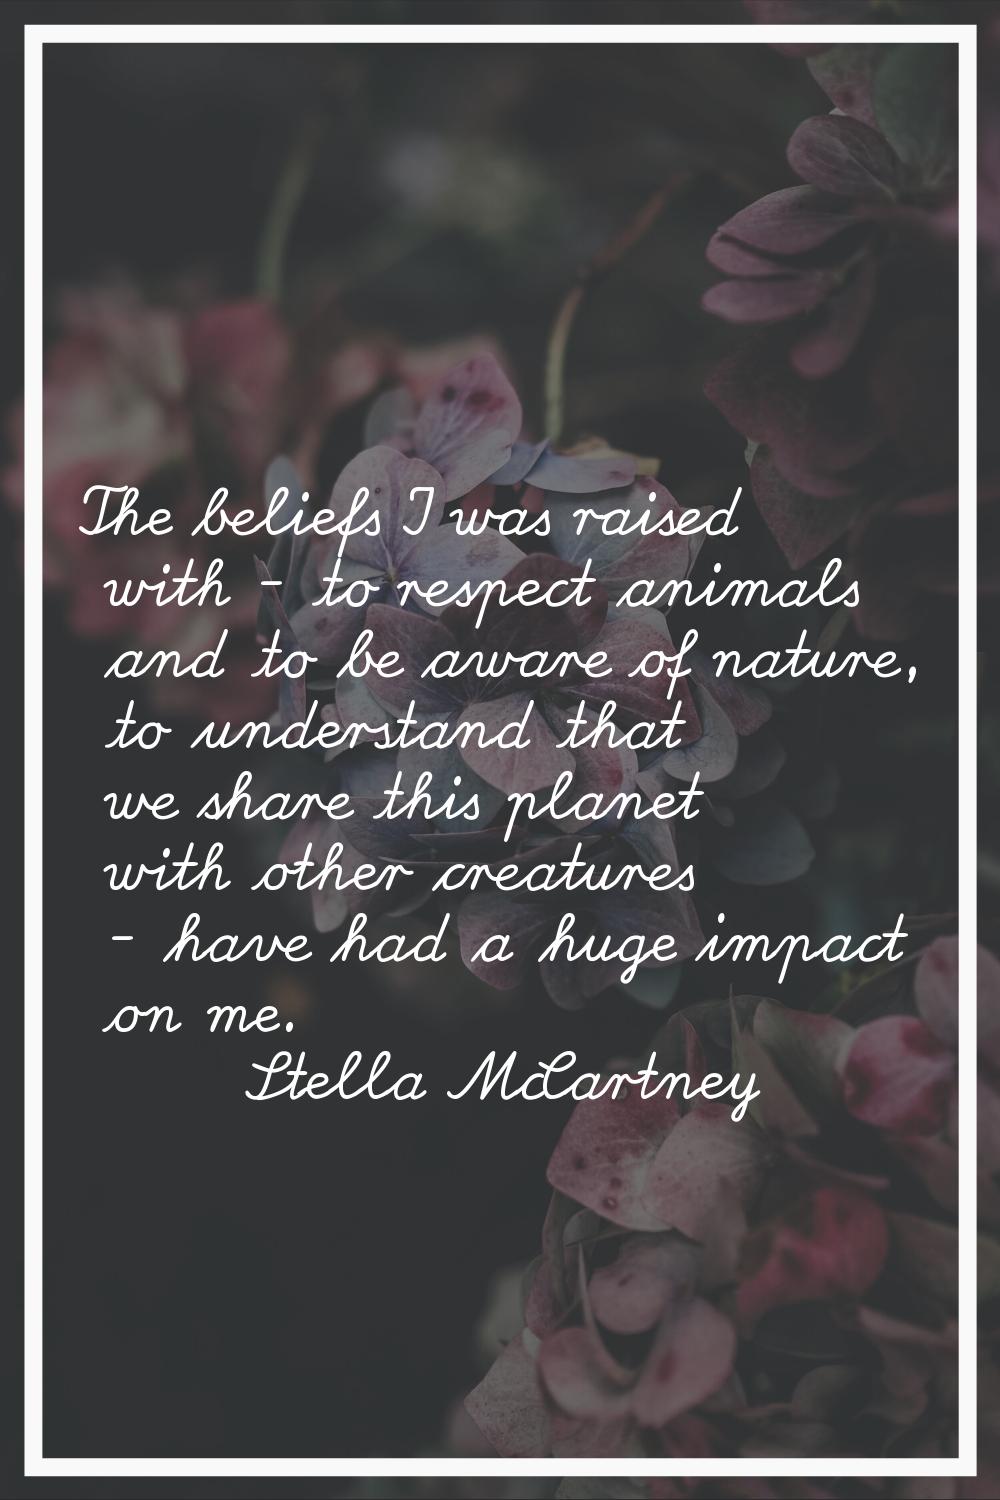 The beliefs I was raised with - to respect animals and to be aware of nature, to understand that we